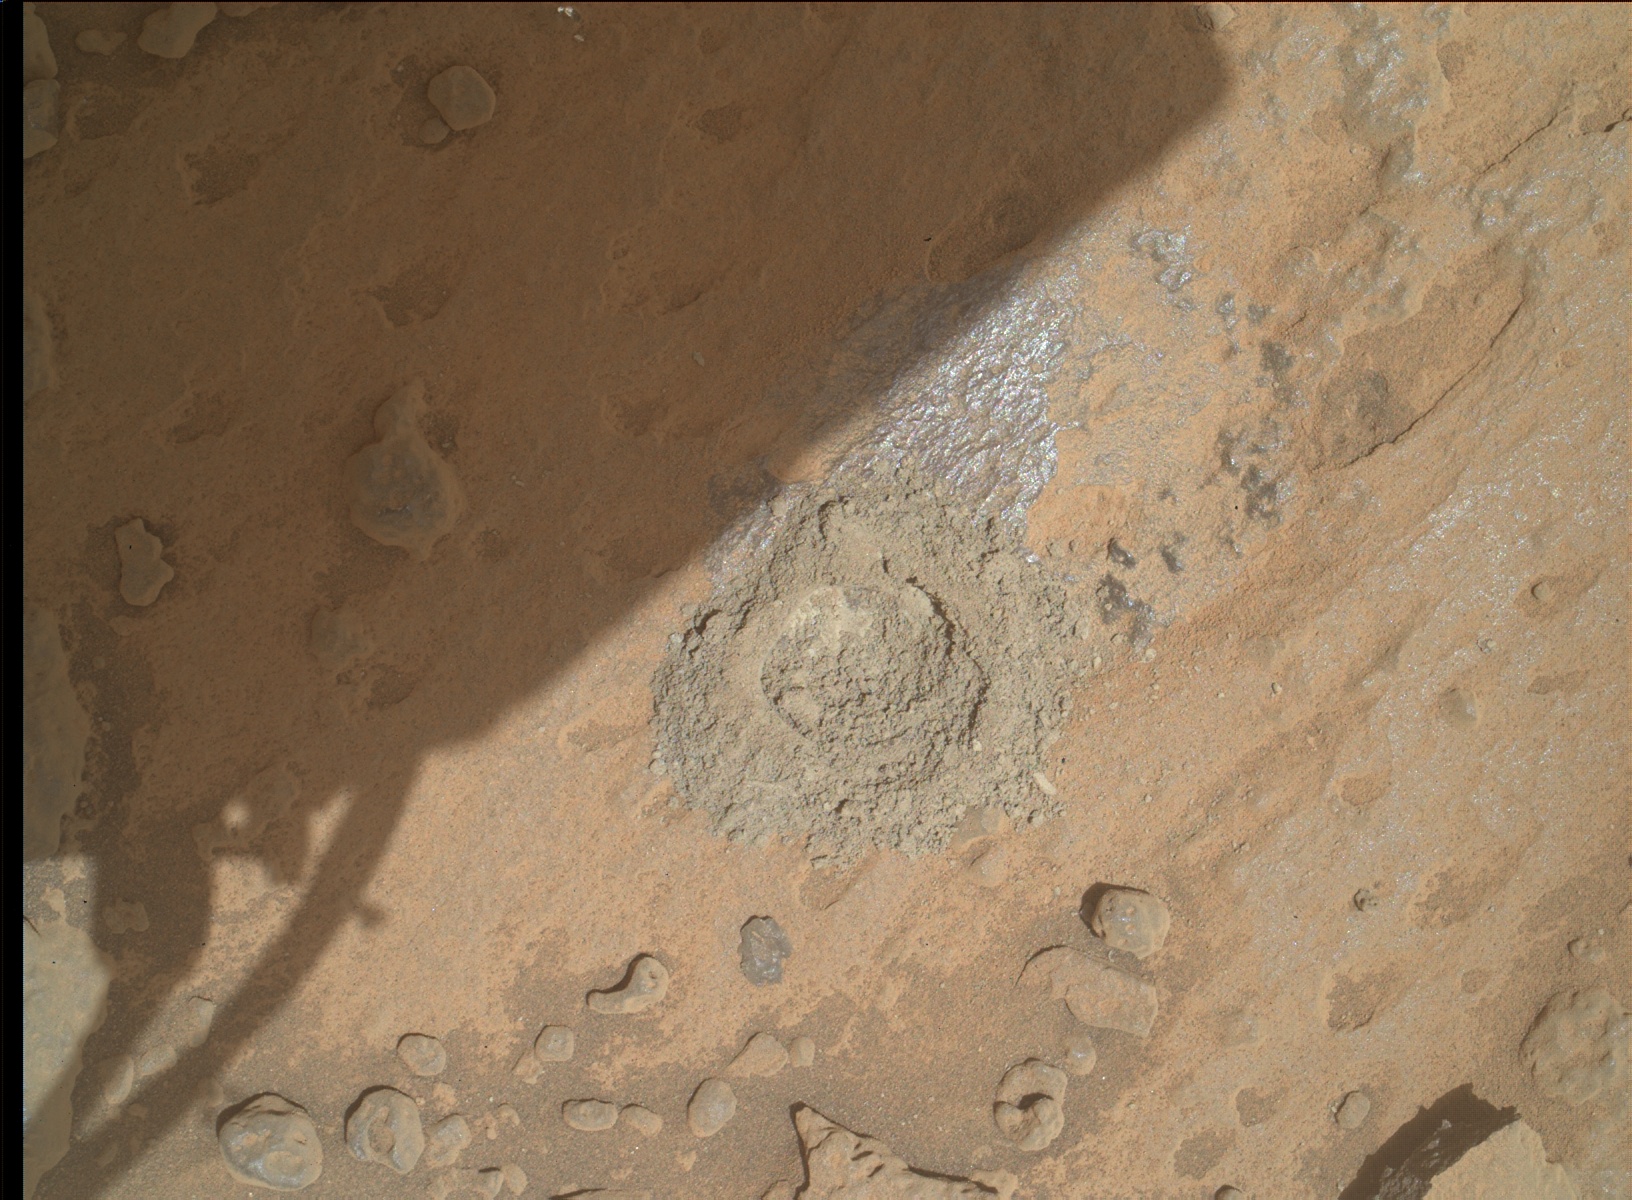 Nasa's Mars rover Curiosity acquired this image using its Mars Hand Lens Imager (MAHLI) on Sol 3744